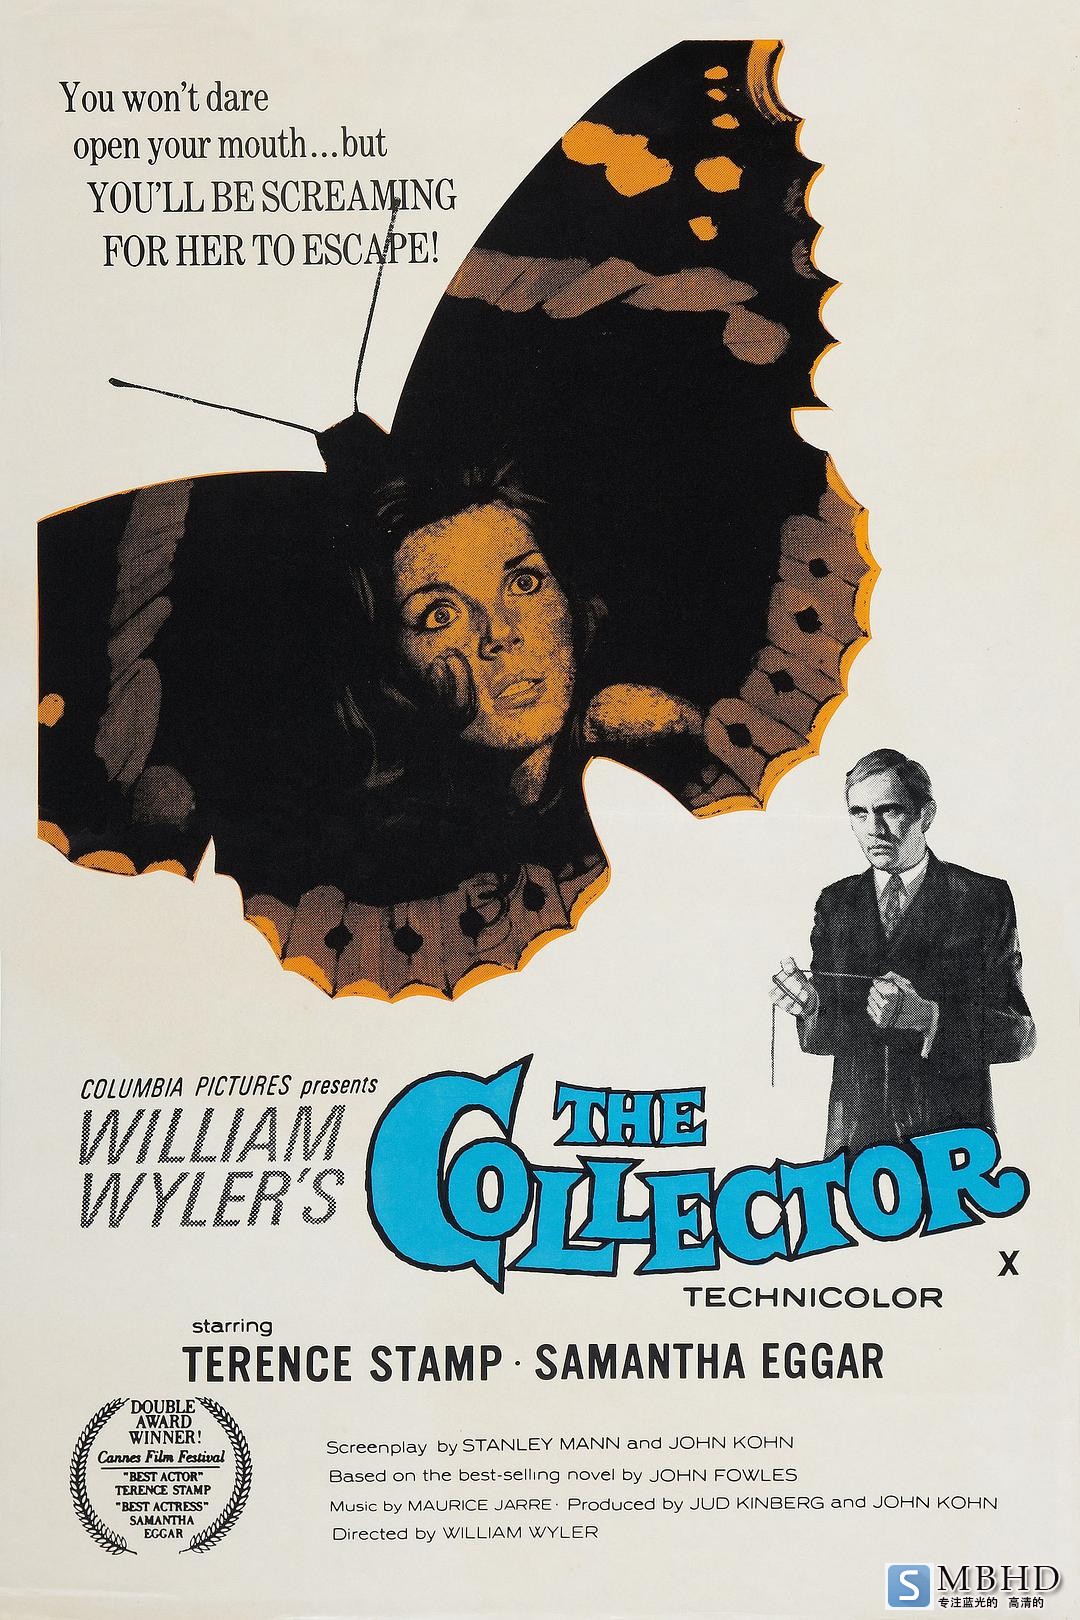  The.Collector.1965.INTERNAL.720p.BluRay.X264-AMIABLE 10.51GB-1.png